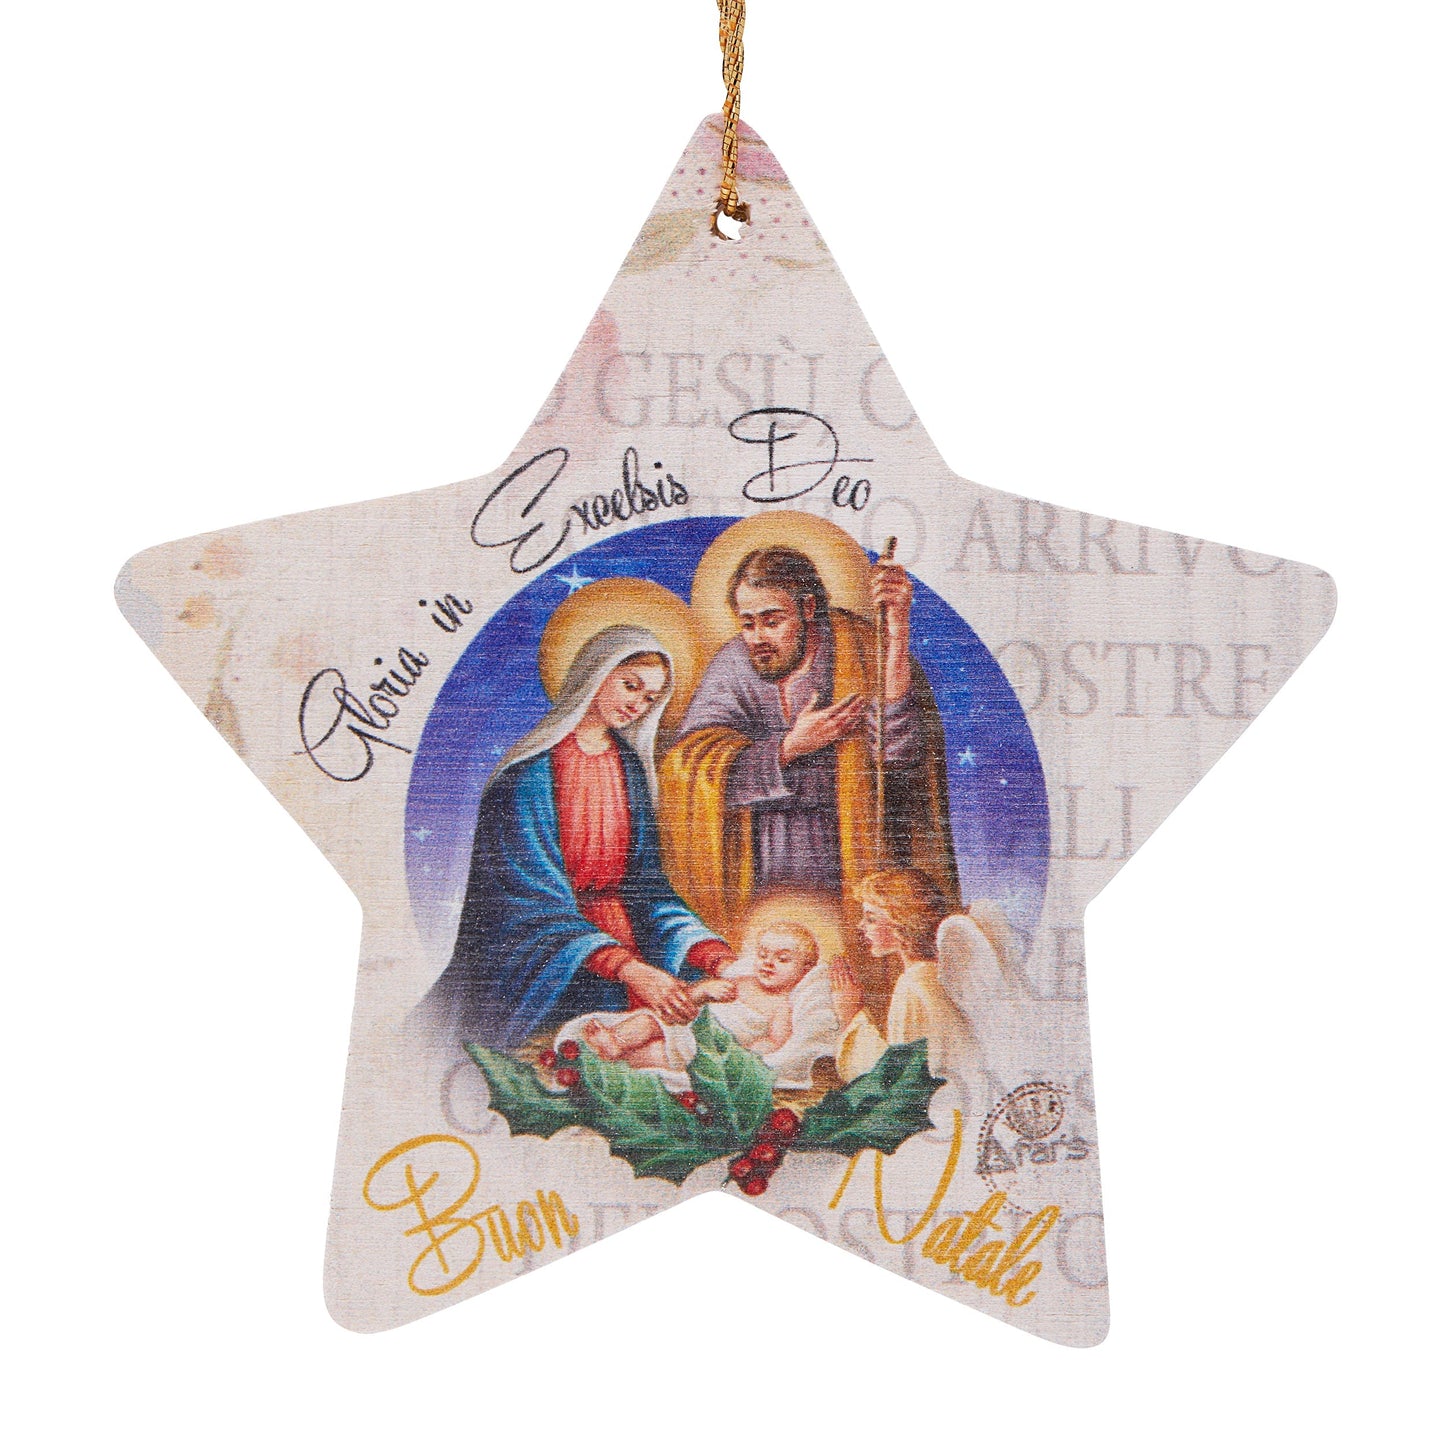 Mondo Cattolico 8 cm (3.15 in) Wooden Star-shaped Christmas Decoration With Nativity Scene